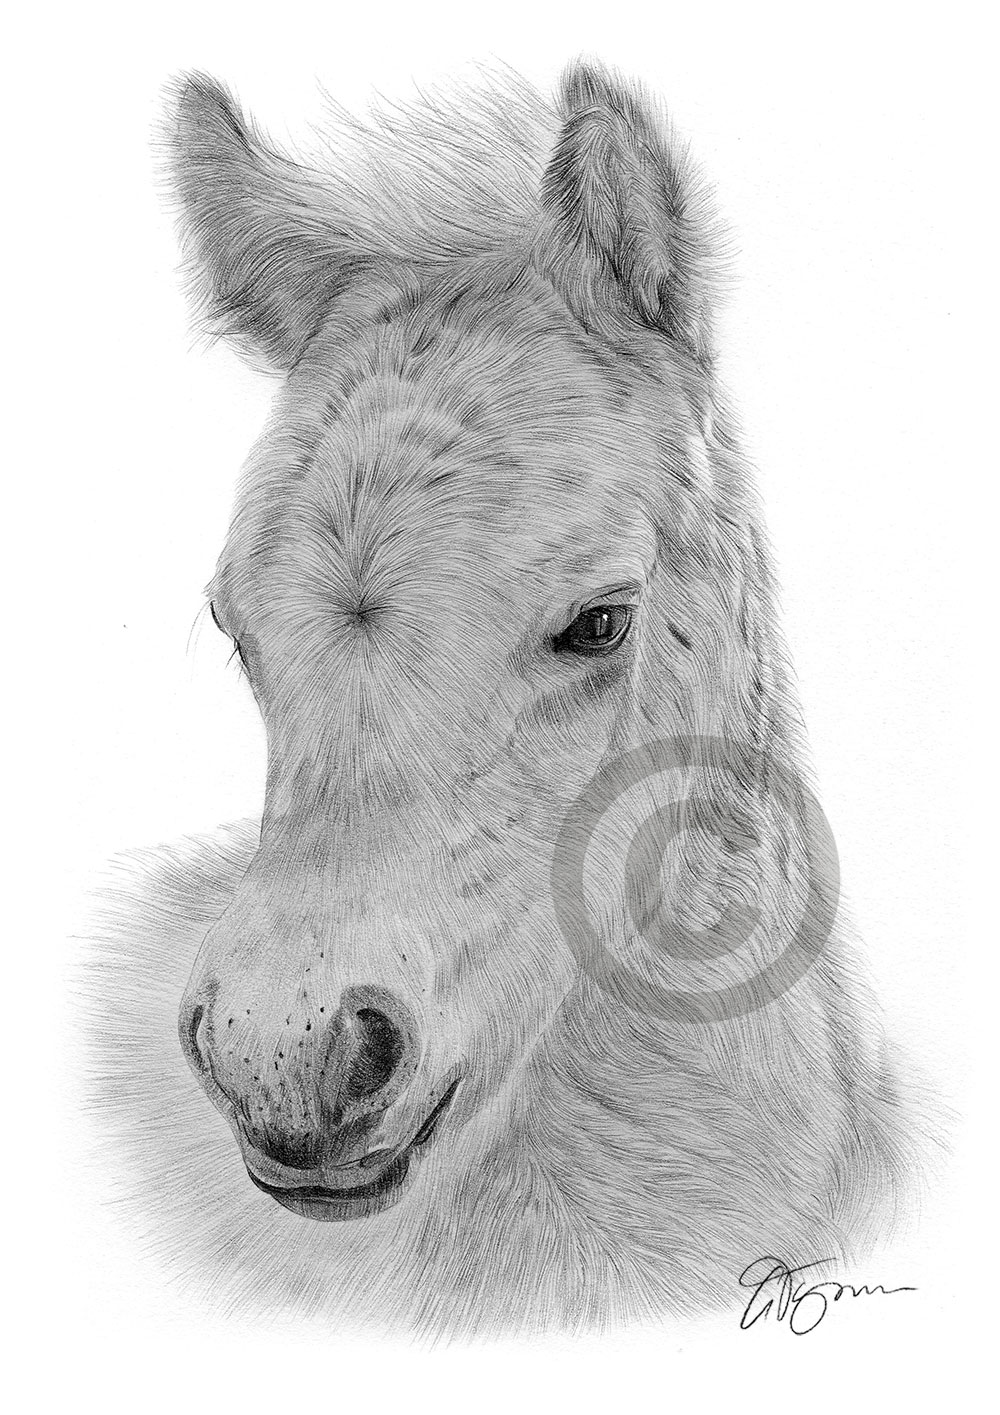 Pencil drawing of a fjord foal by artist Gary Tymon